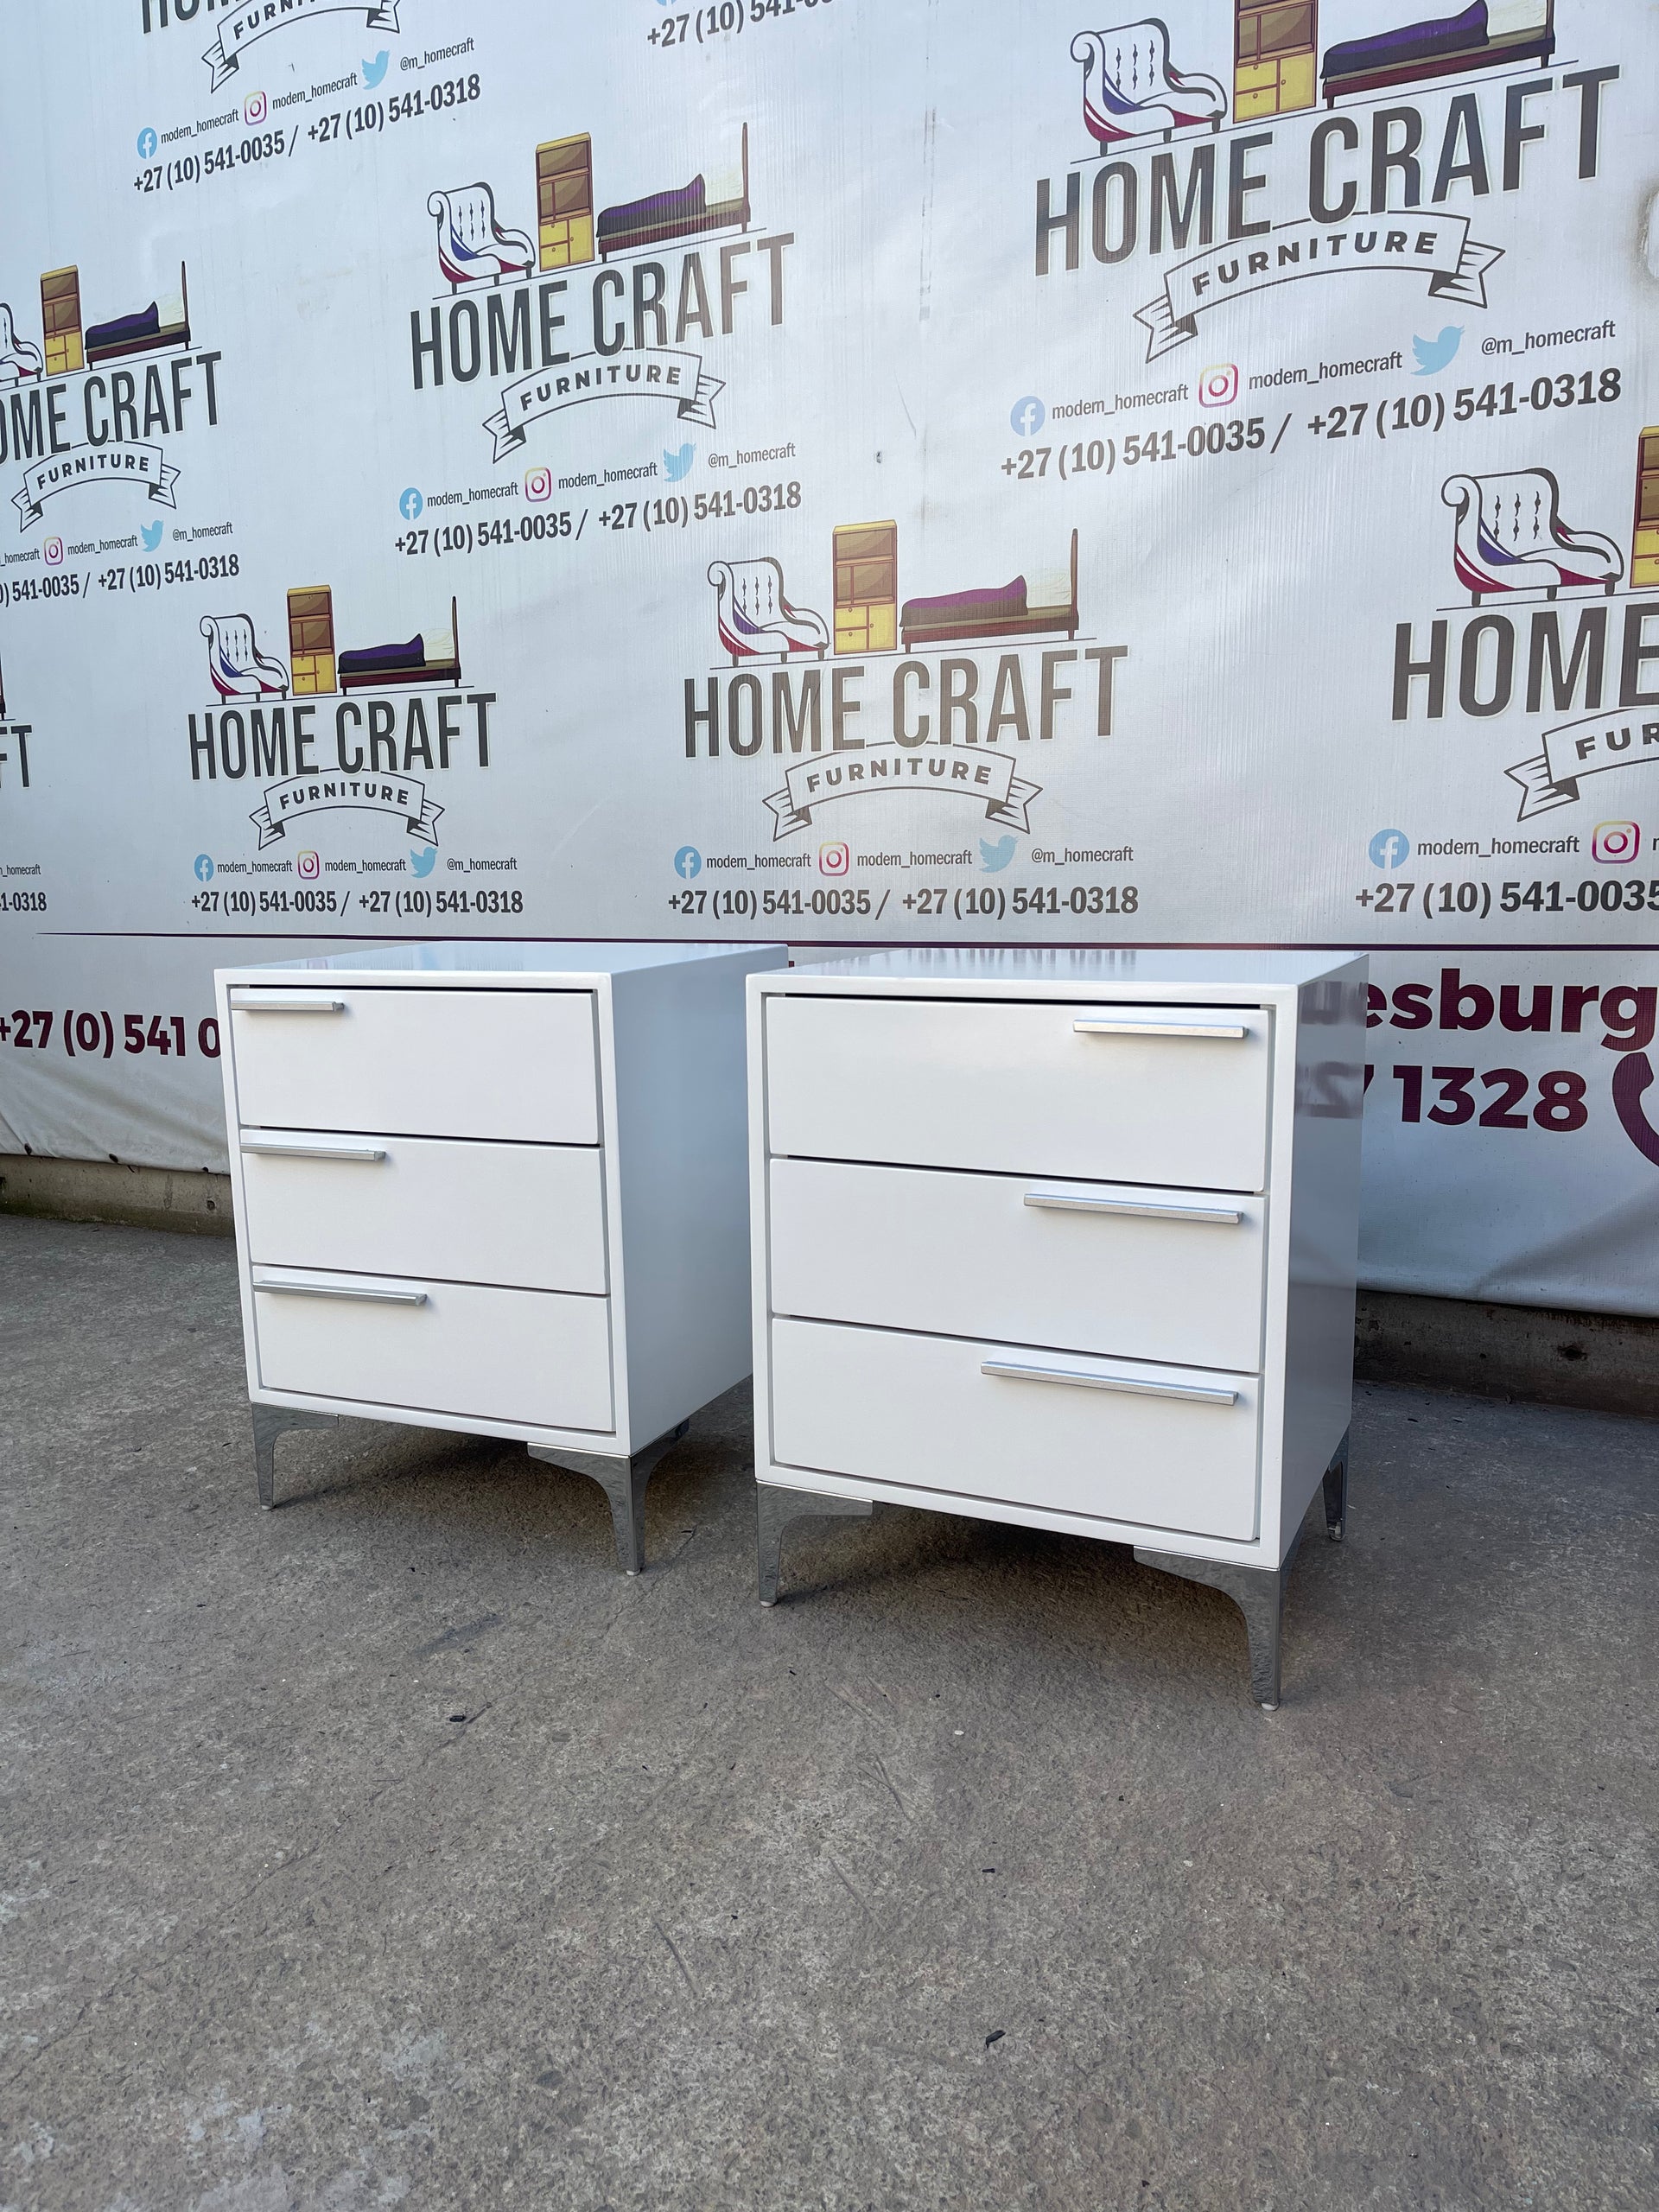 3 Drawer Pedestals With Solid Handles (Different Sizes)